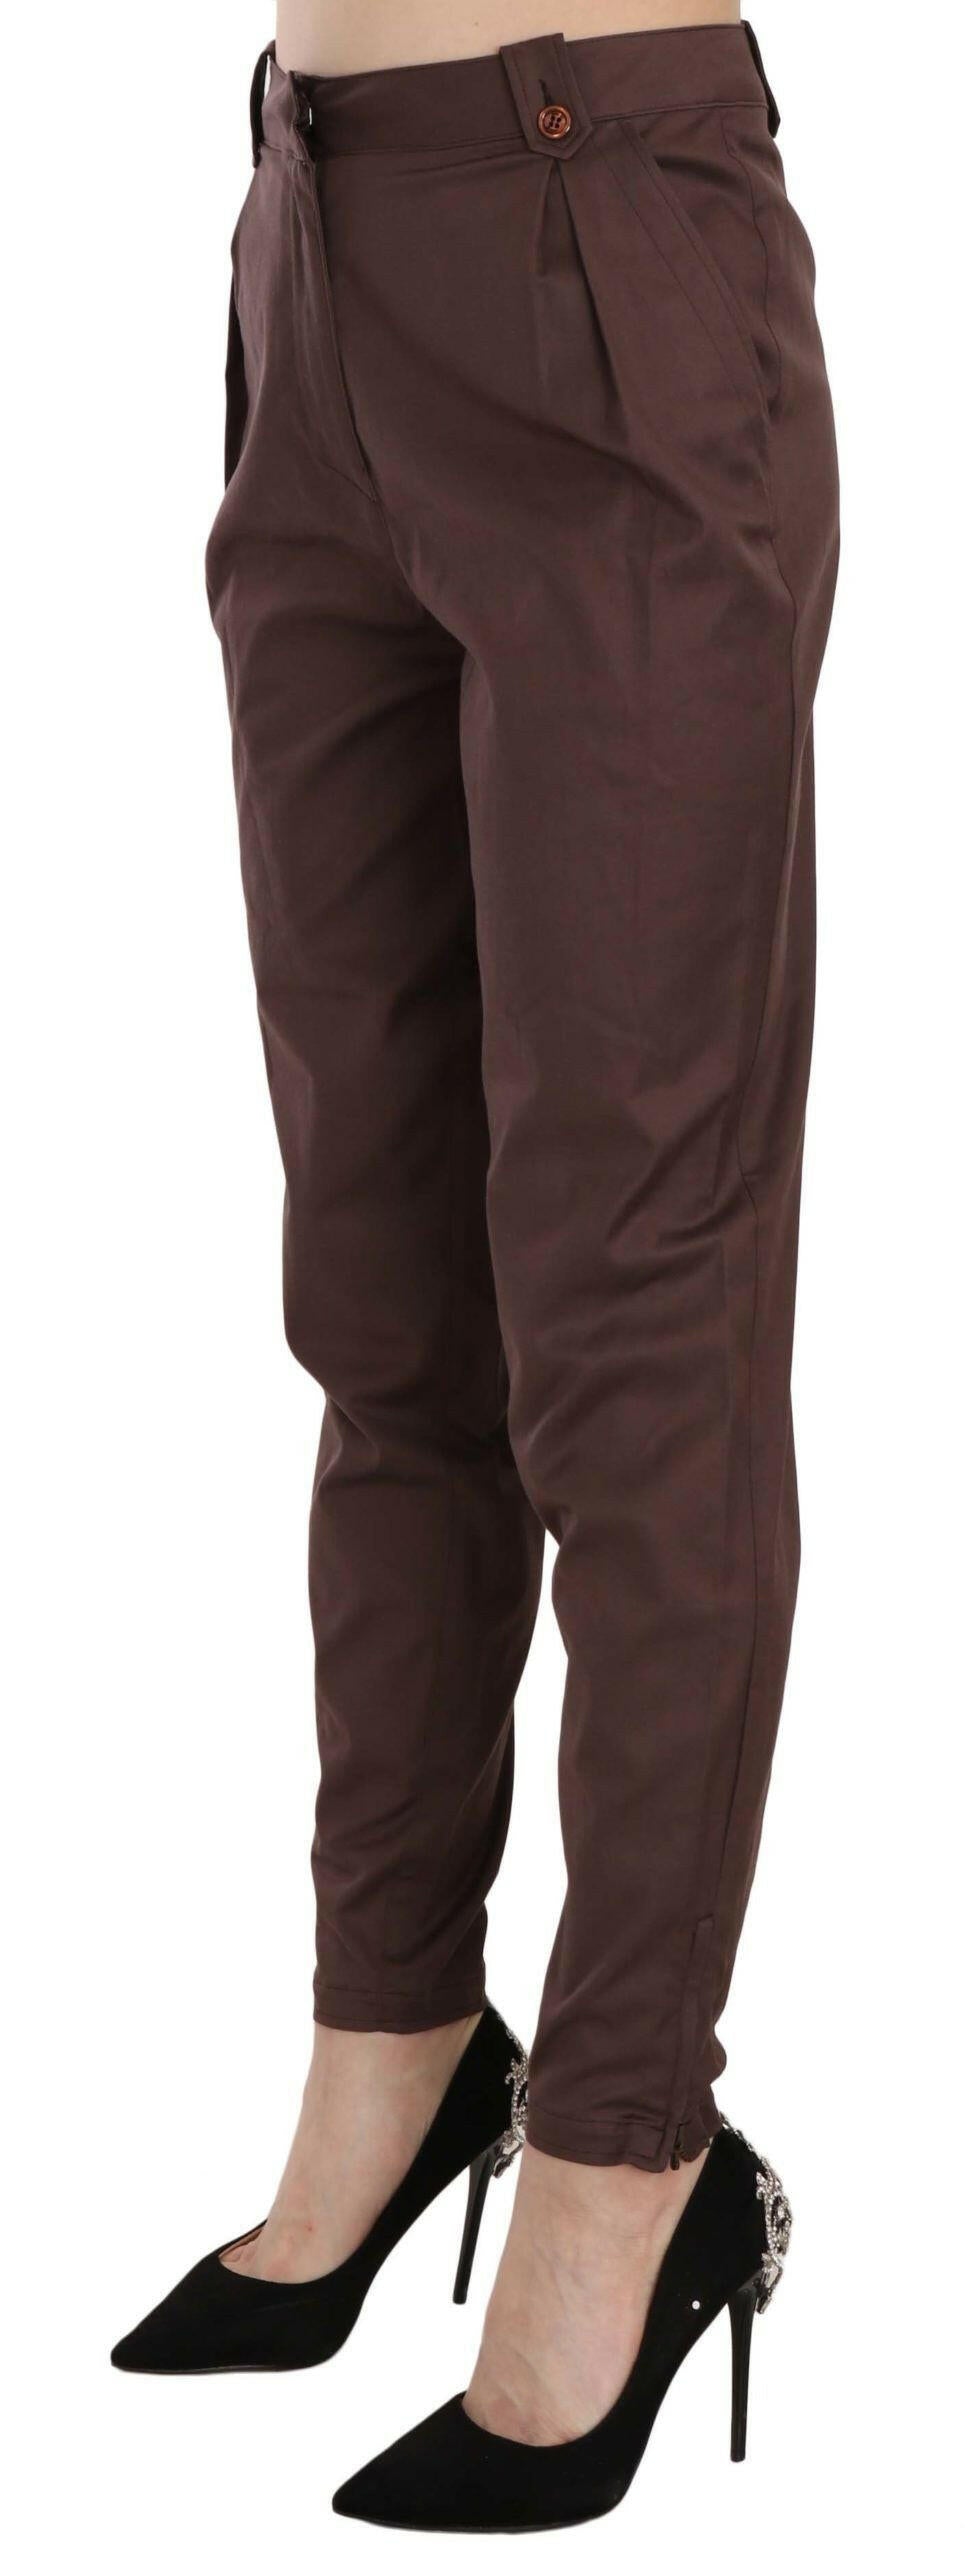 Just Cavalli Brown High Waist Tapered Formal Trousers Pants - GENUINE AUTHENTIC BRAND LLC  